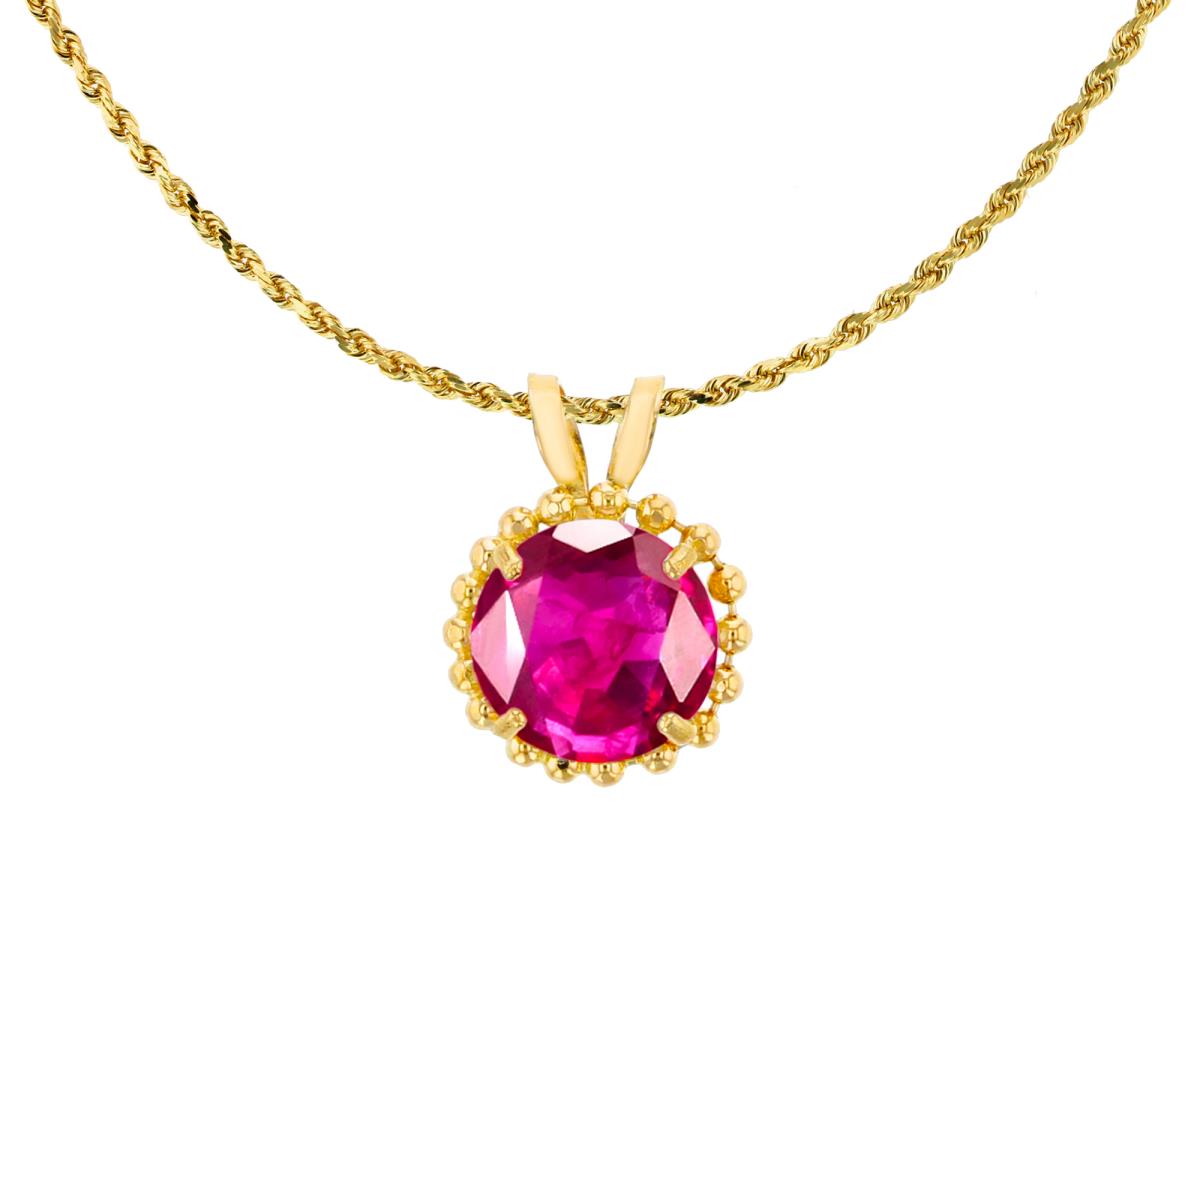 10K Yellow Gold 6mm Rd Cut Created Ruby with Bead Frame Rabbit Ear 18" Necklace